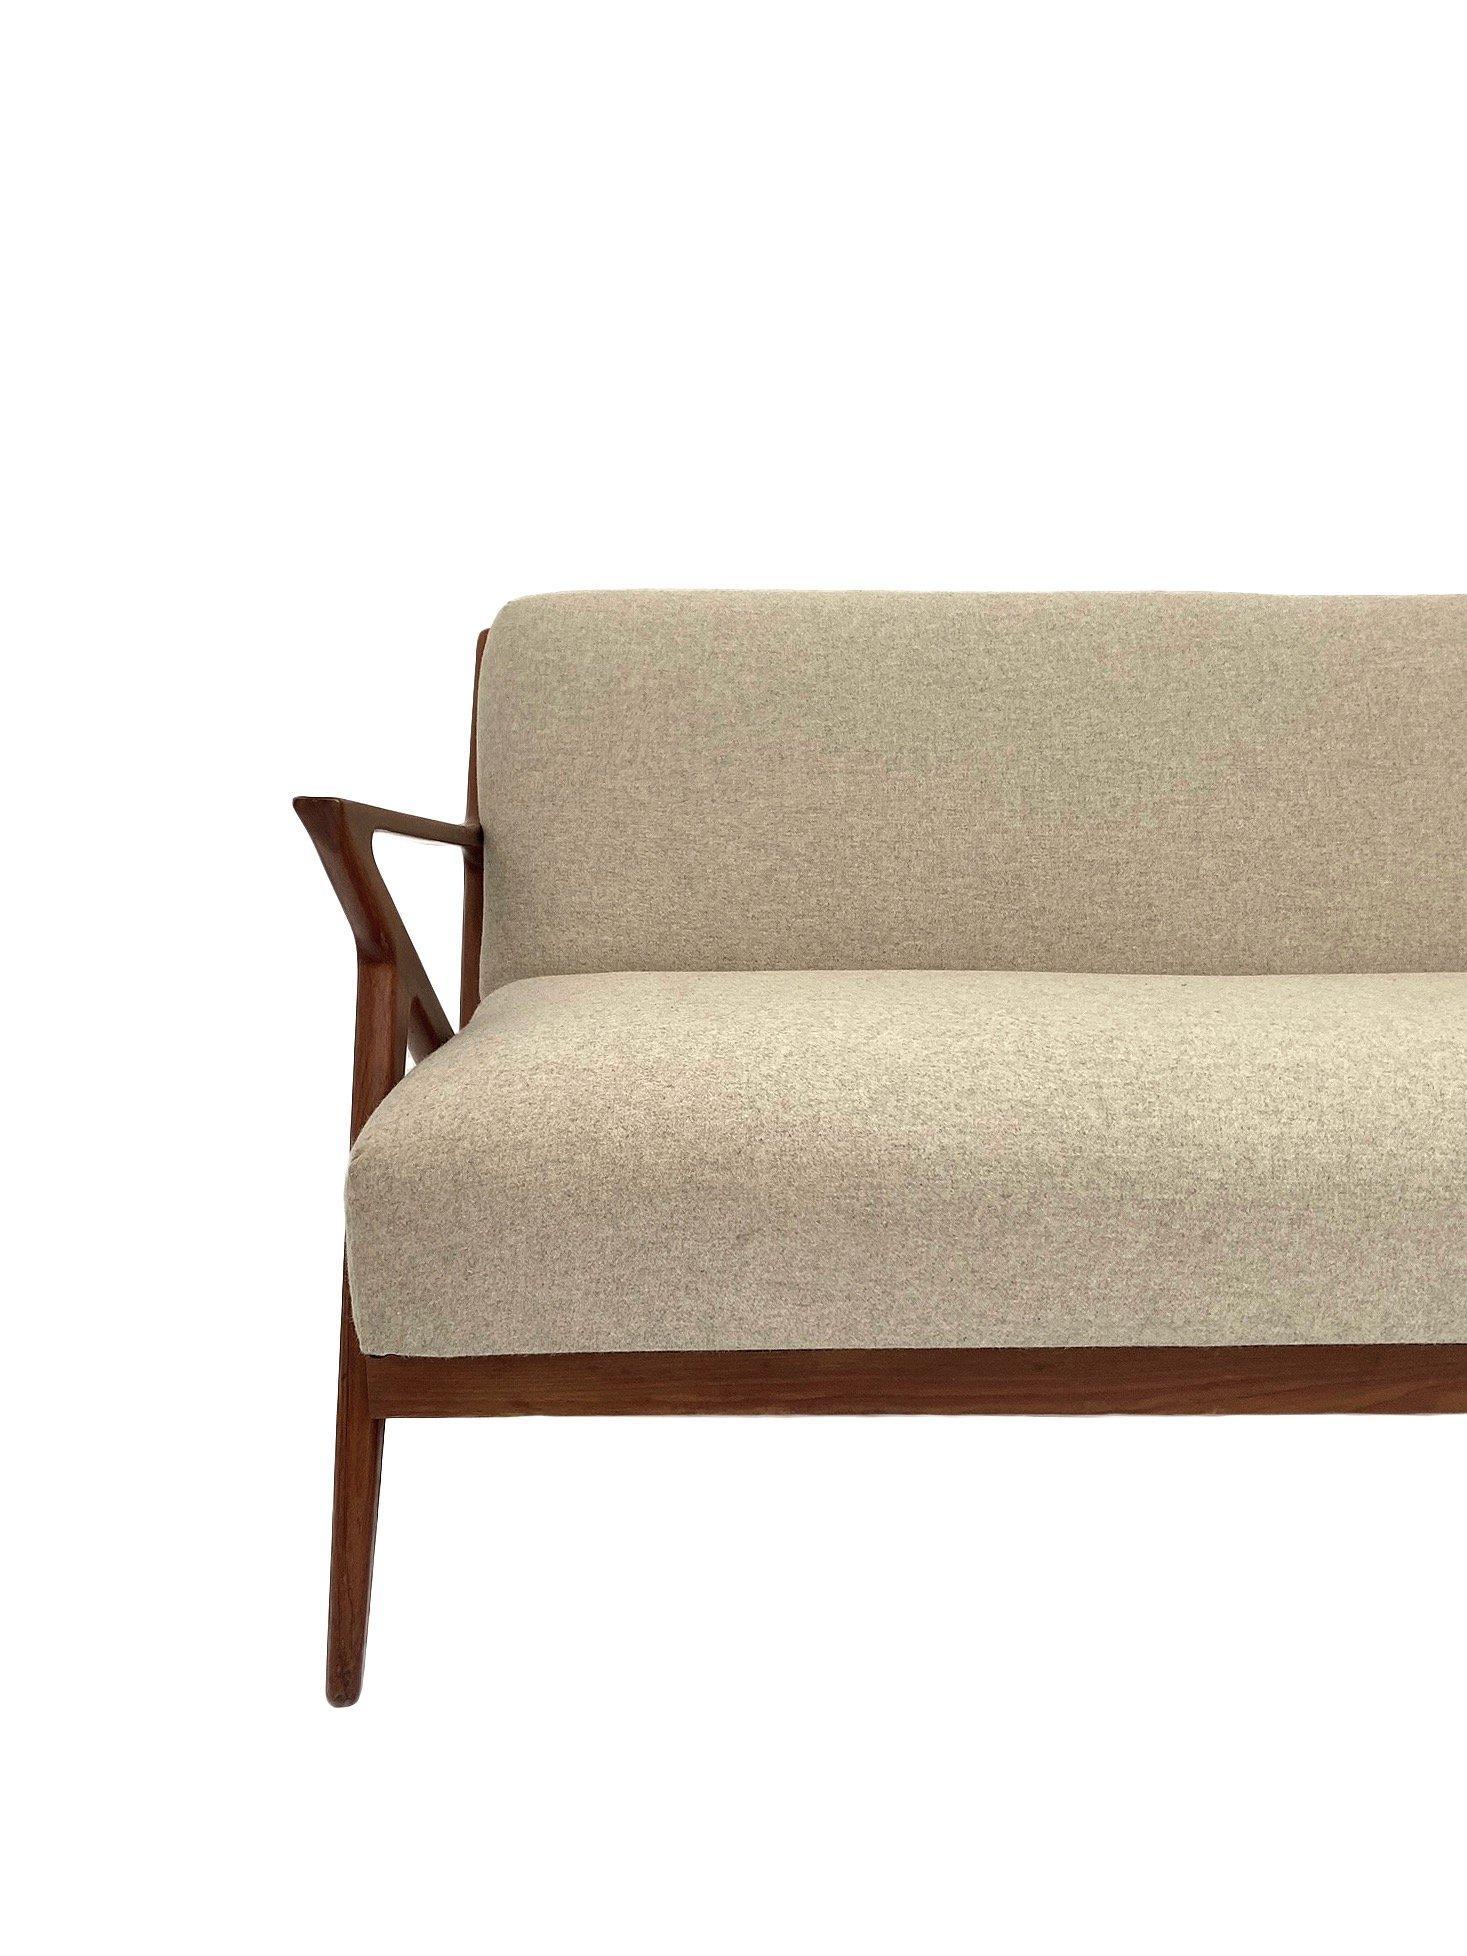 A beautiful rare Danish teak and cream wool 3 seater ‘Z’ Model sofa bed designed by Poul Jensen for Selig OPE in the 1950s, this would make a stylish addition to any living or work area.

The sofa has a sprung base and padded backrest for enhanced